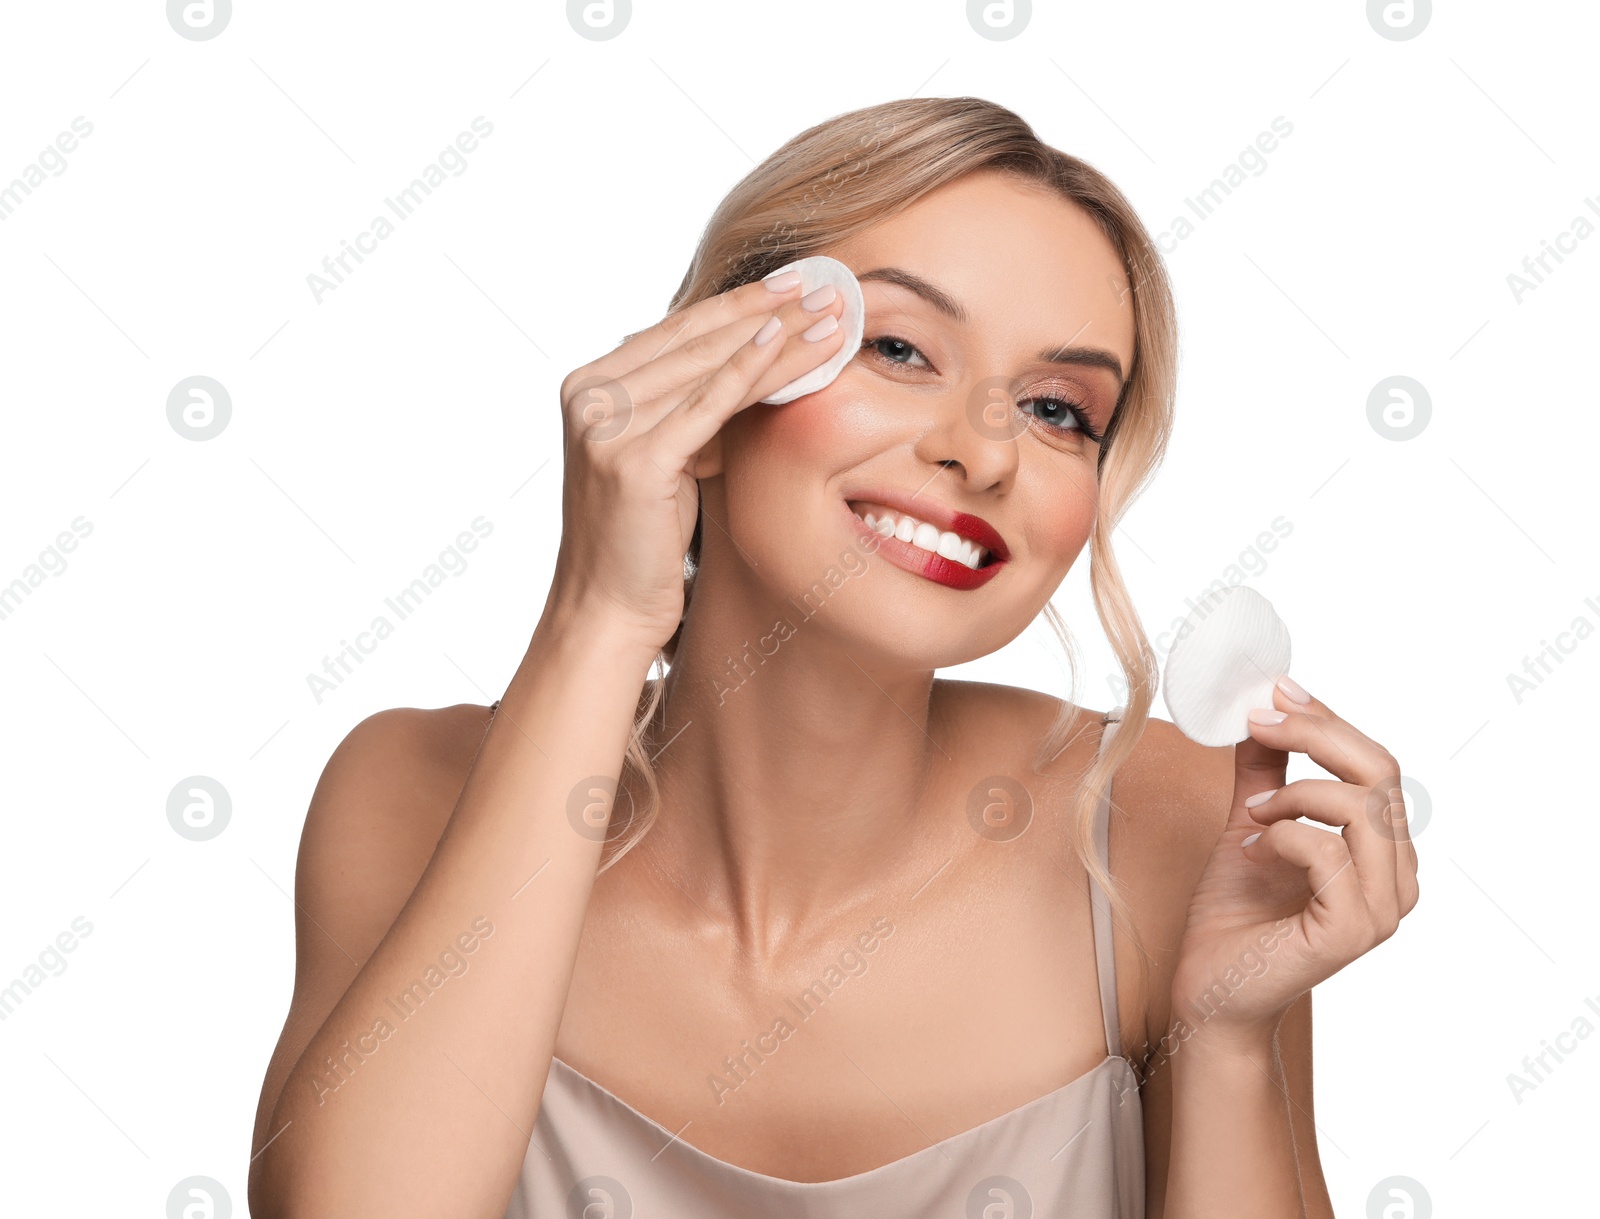 Photo of Smiling woman removing makeup with cotton pads on white background